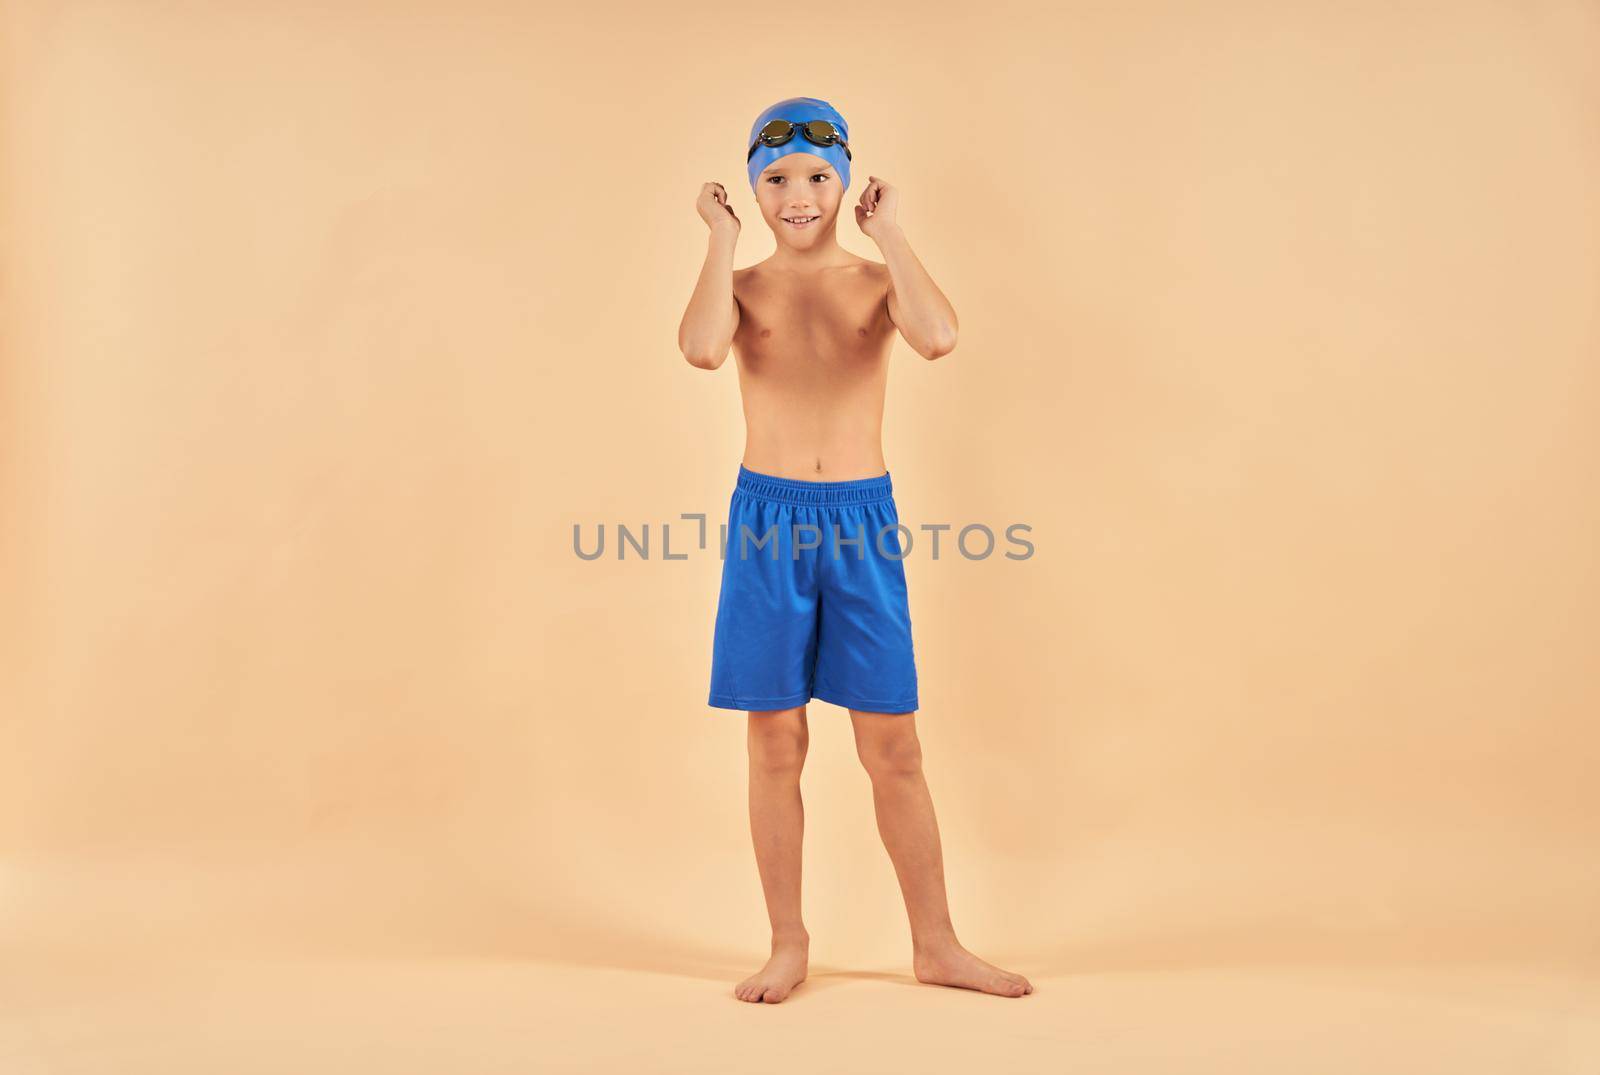 Adorable male child wearing swim trunks and cap while looking away and smiling